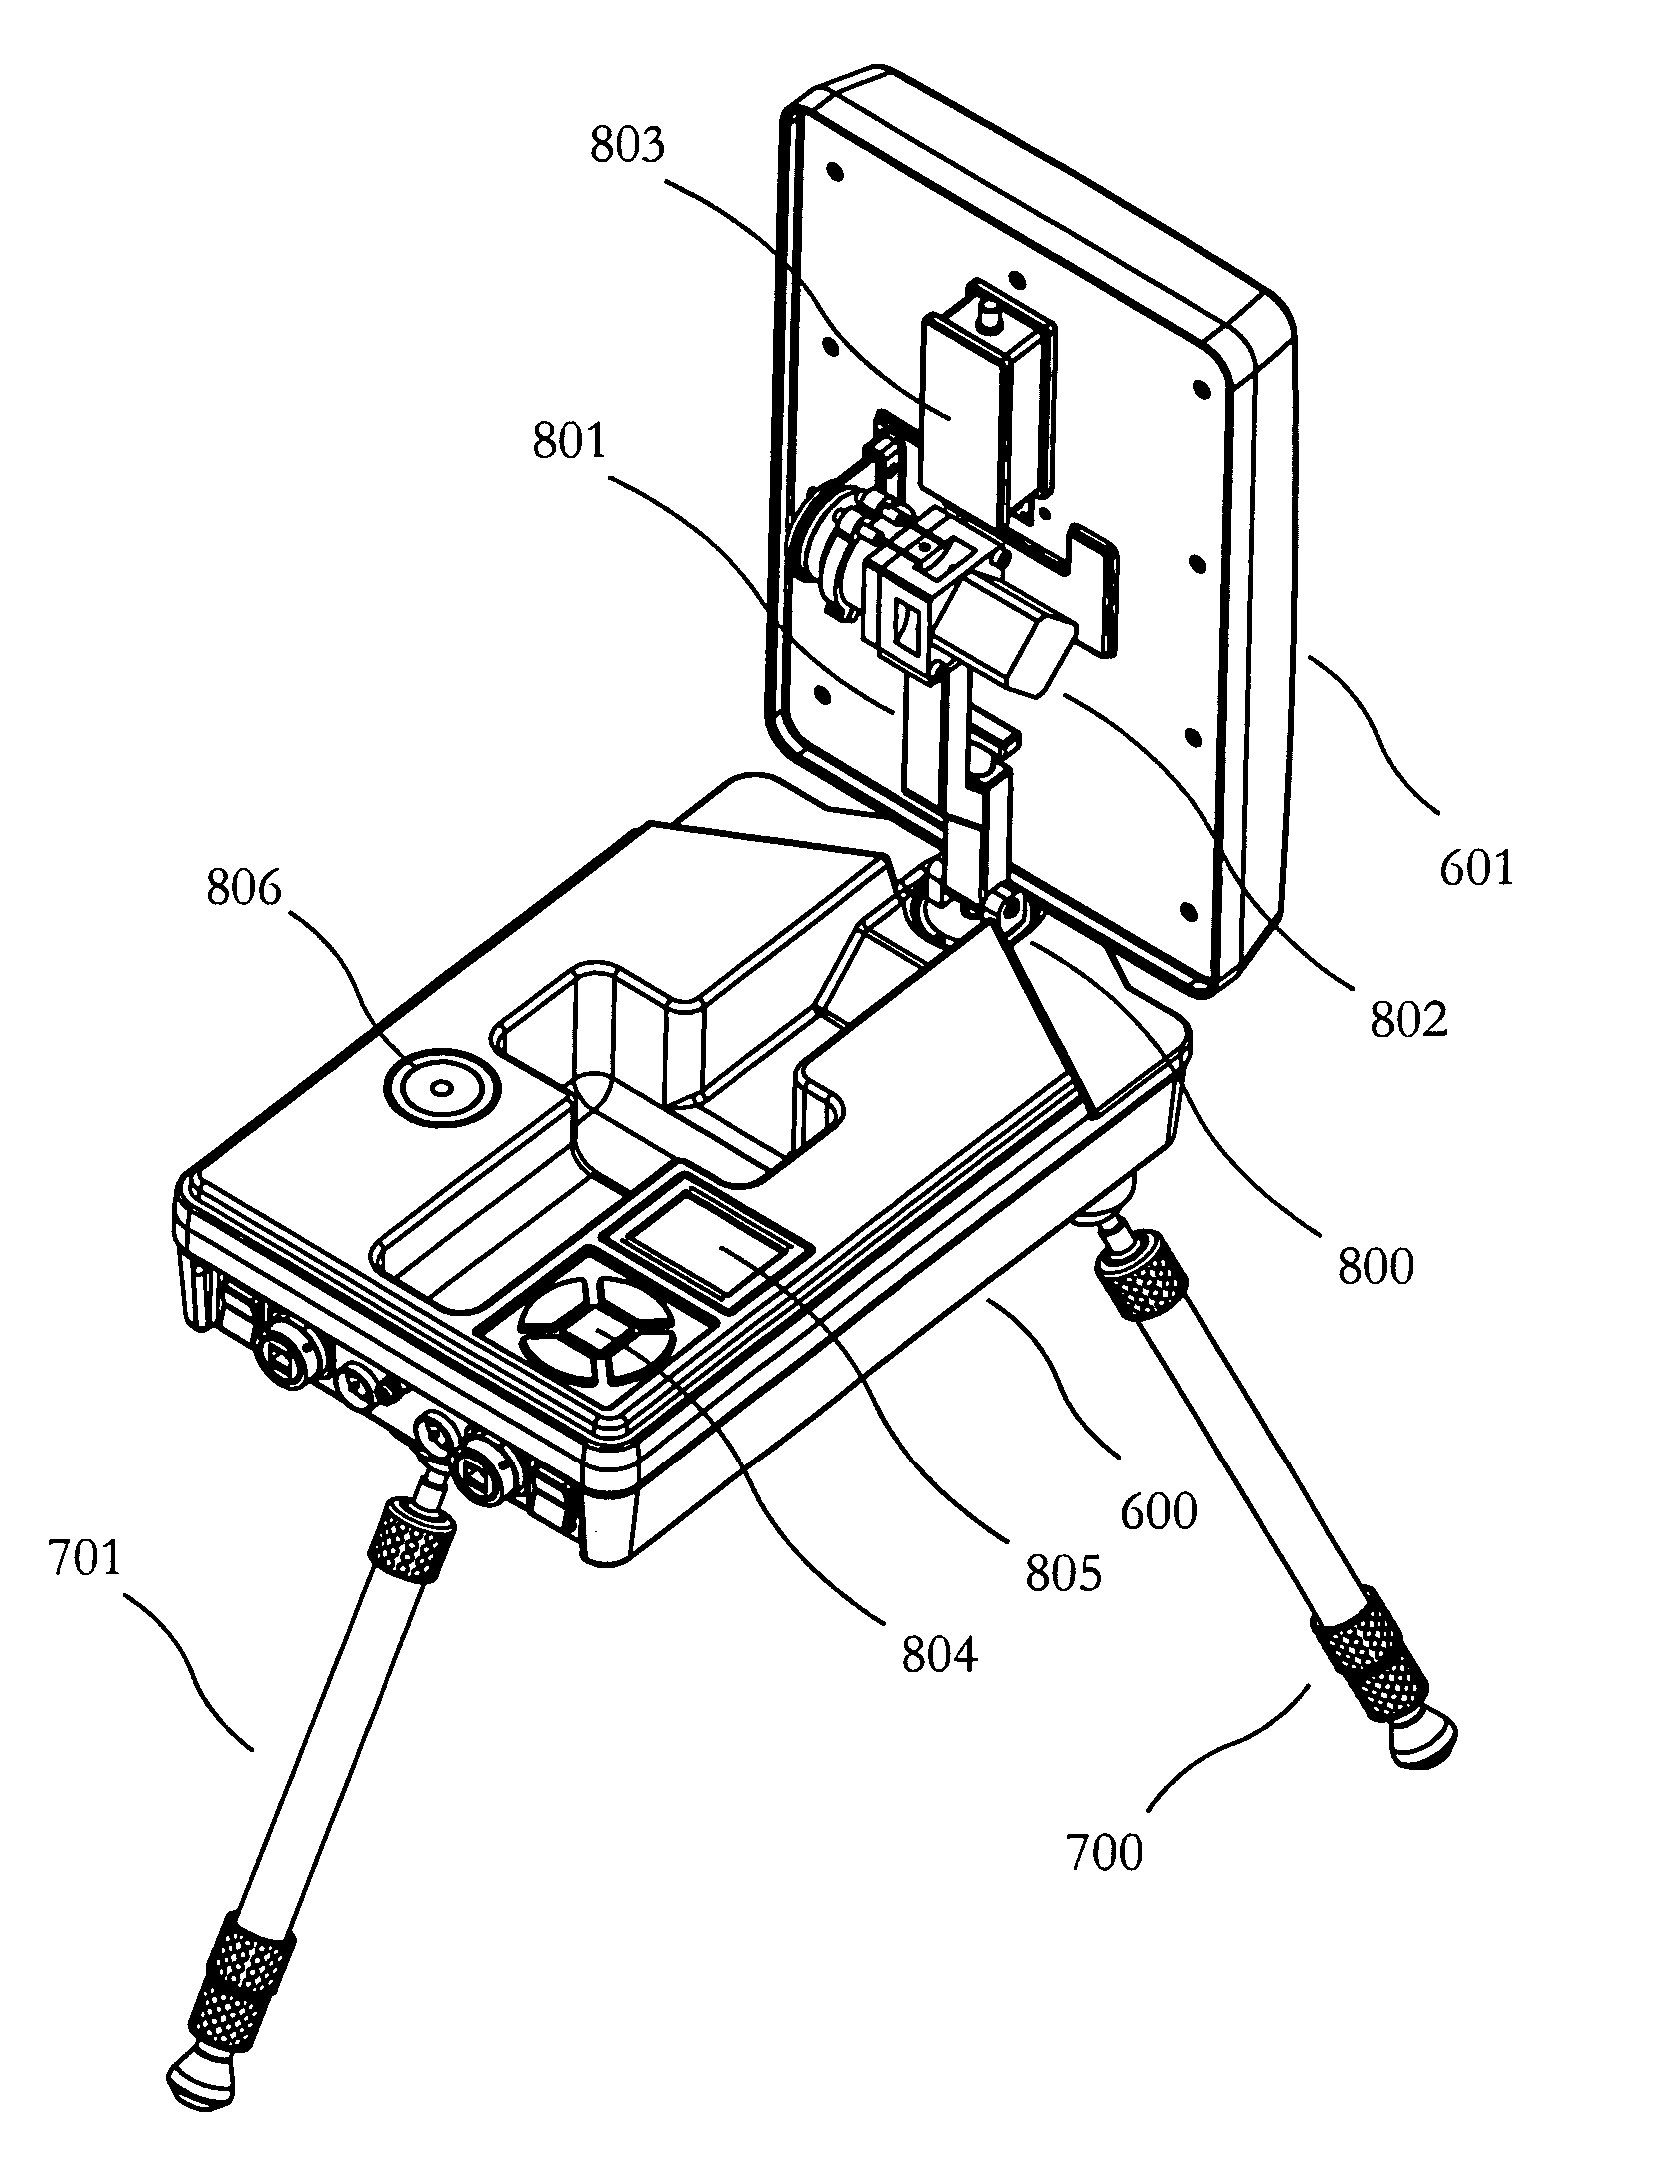 Portable antenna positioner apparatus and method